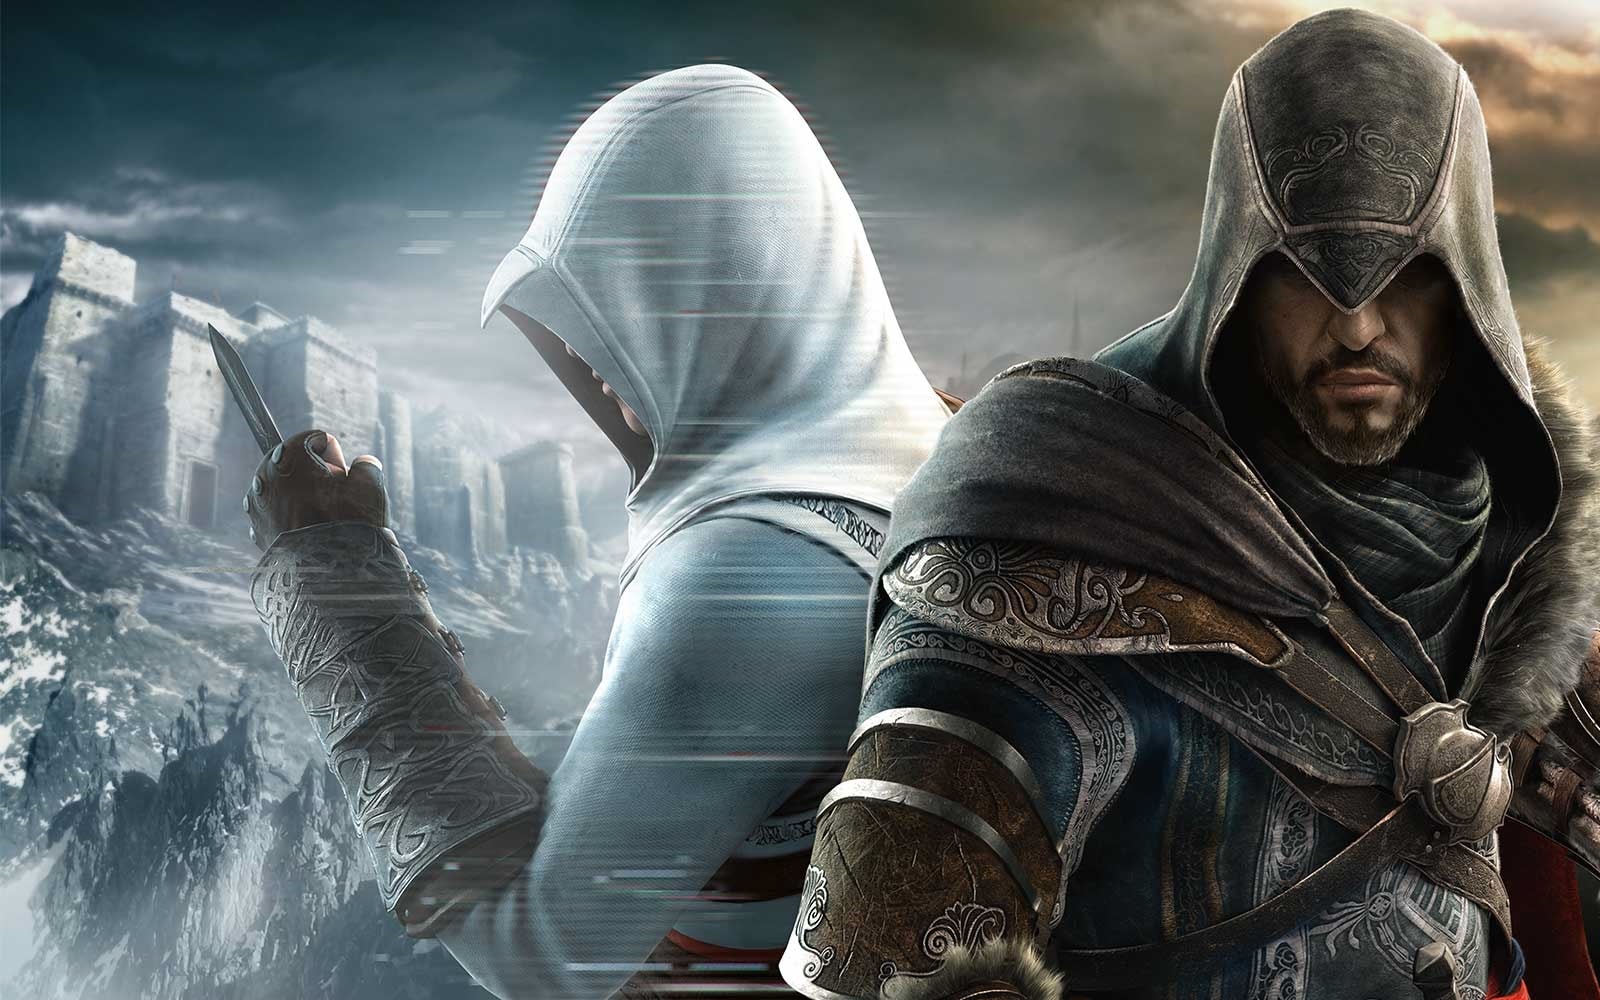 Assassin's Creed: Revelations Game for Android - Download